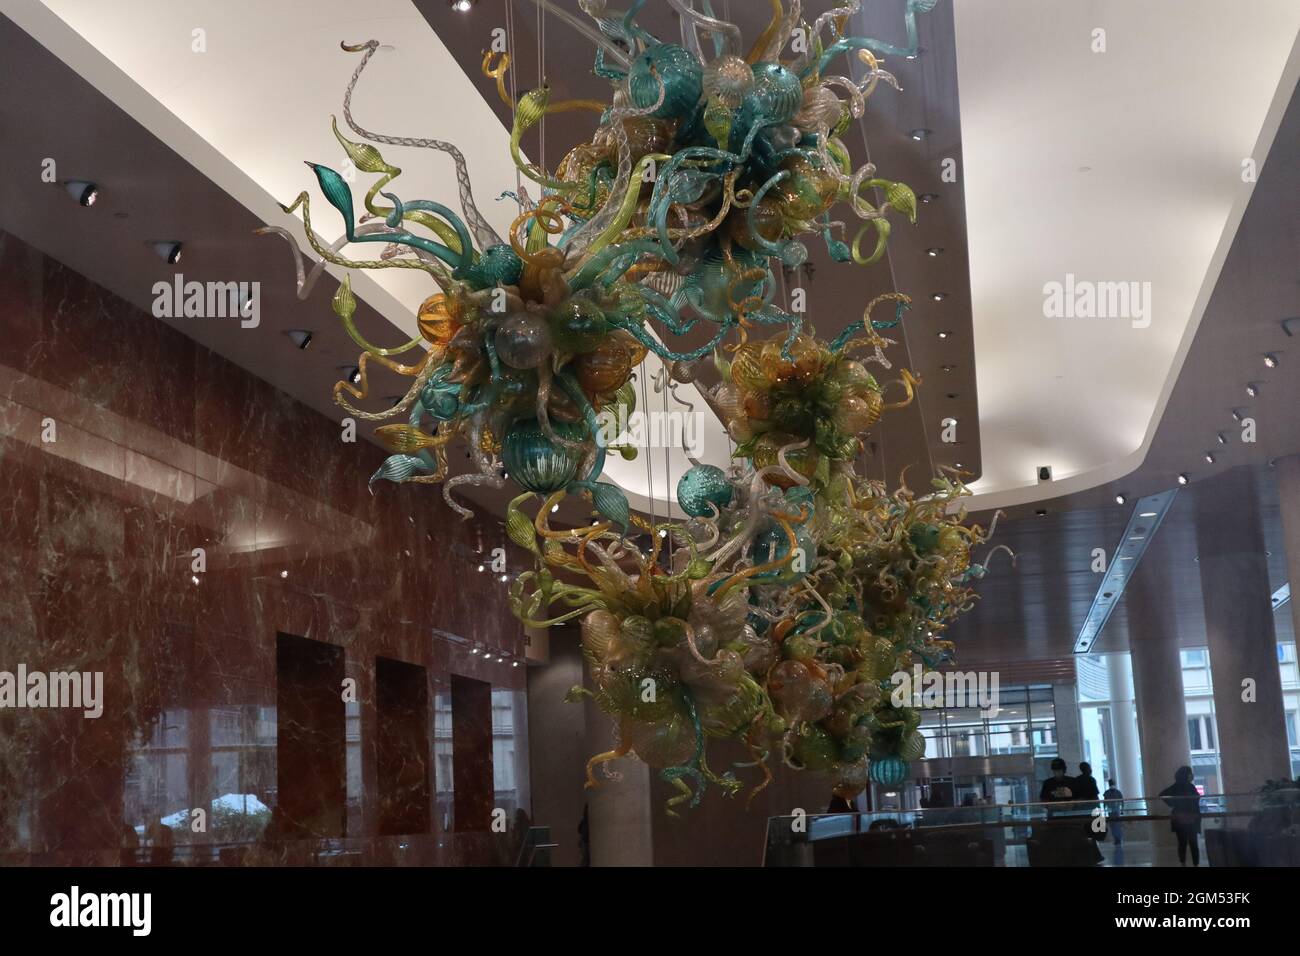 Chihuly glass art in the Gonda building at the Mayo Clinc Stock Photo